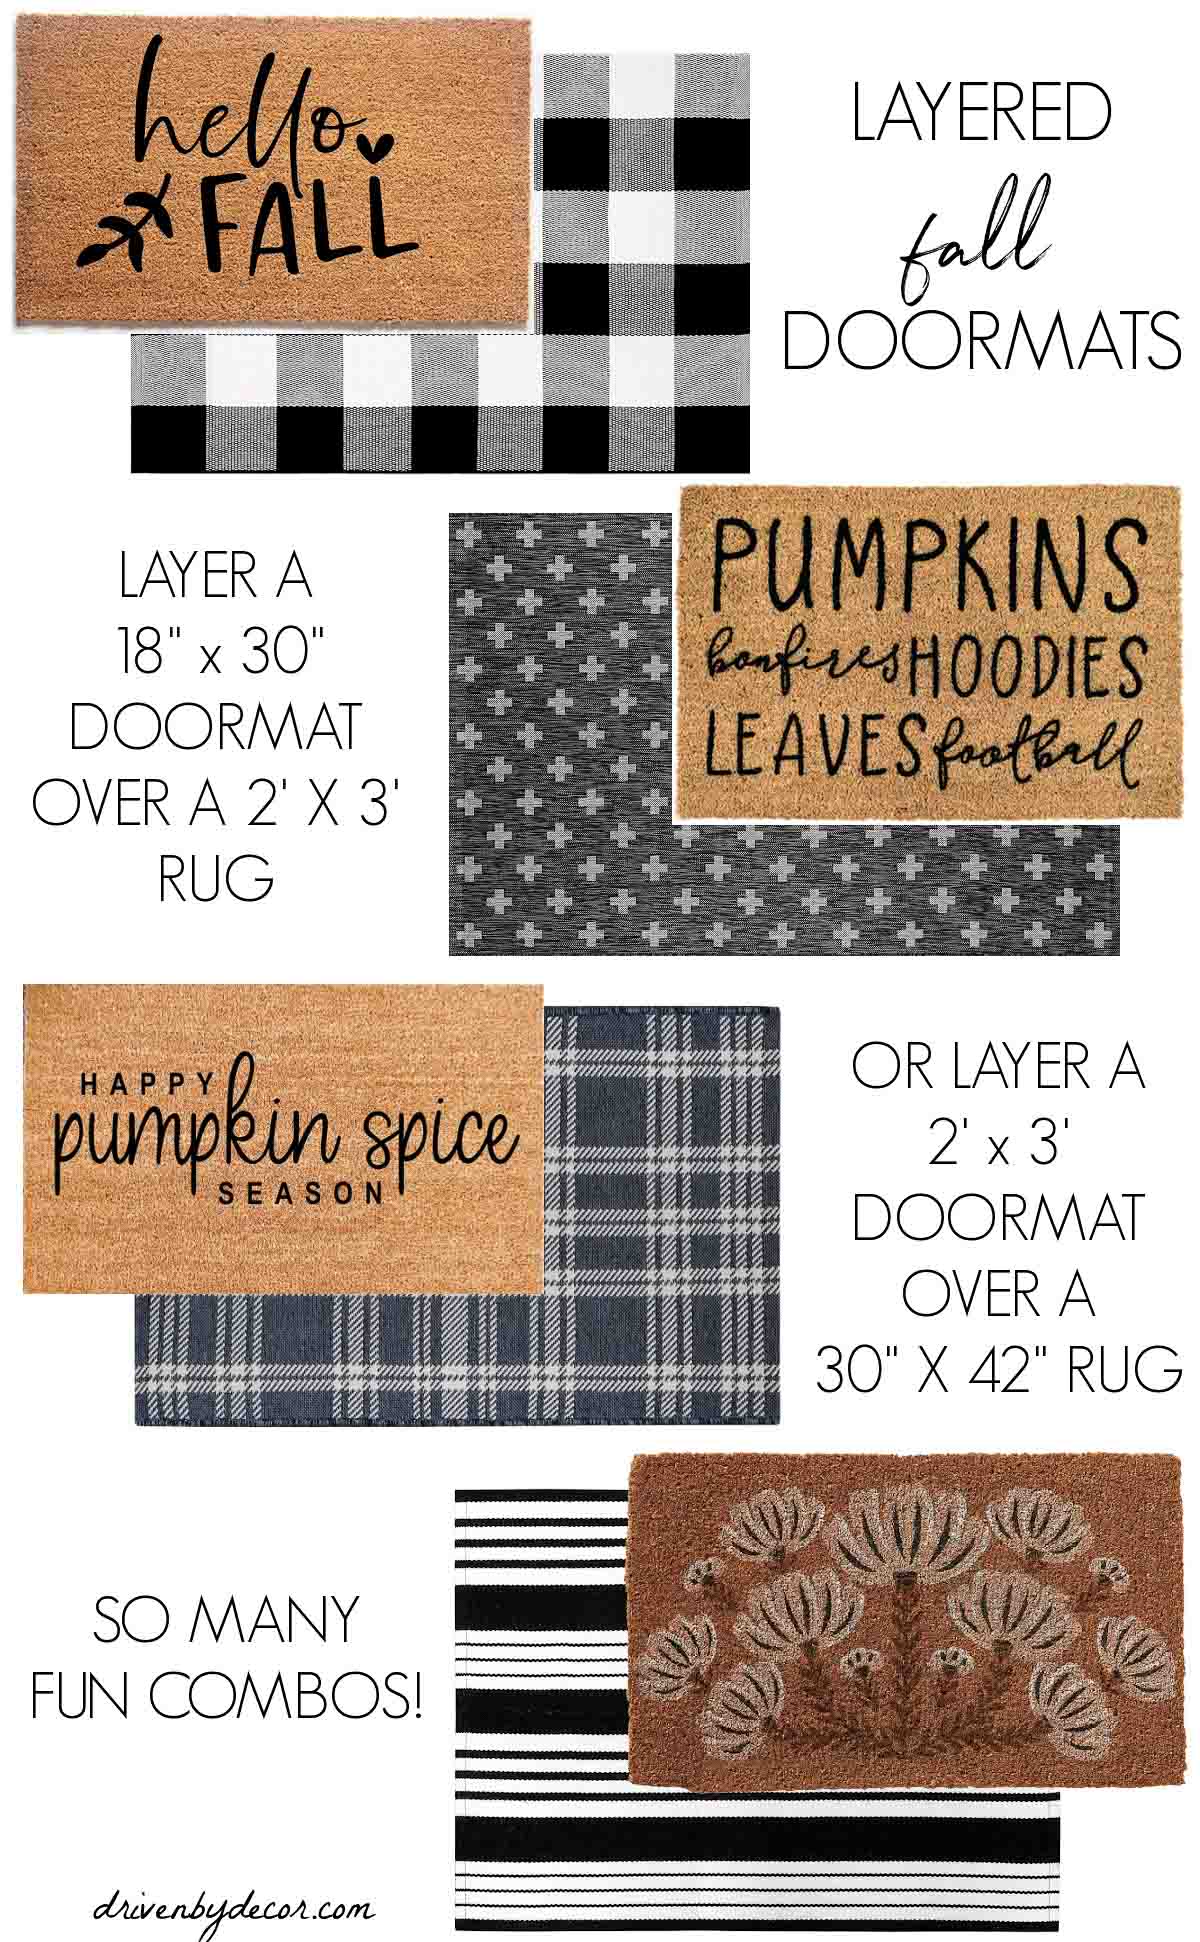 Examples of layering a fall doormat over an outdoor rug for fall!